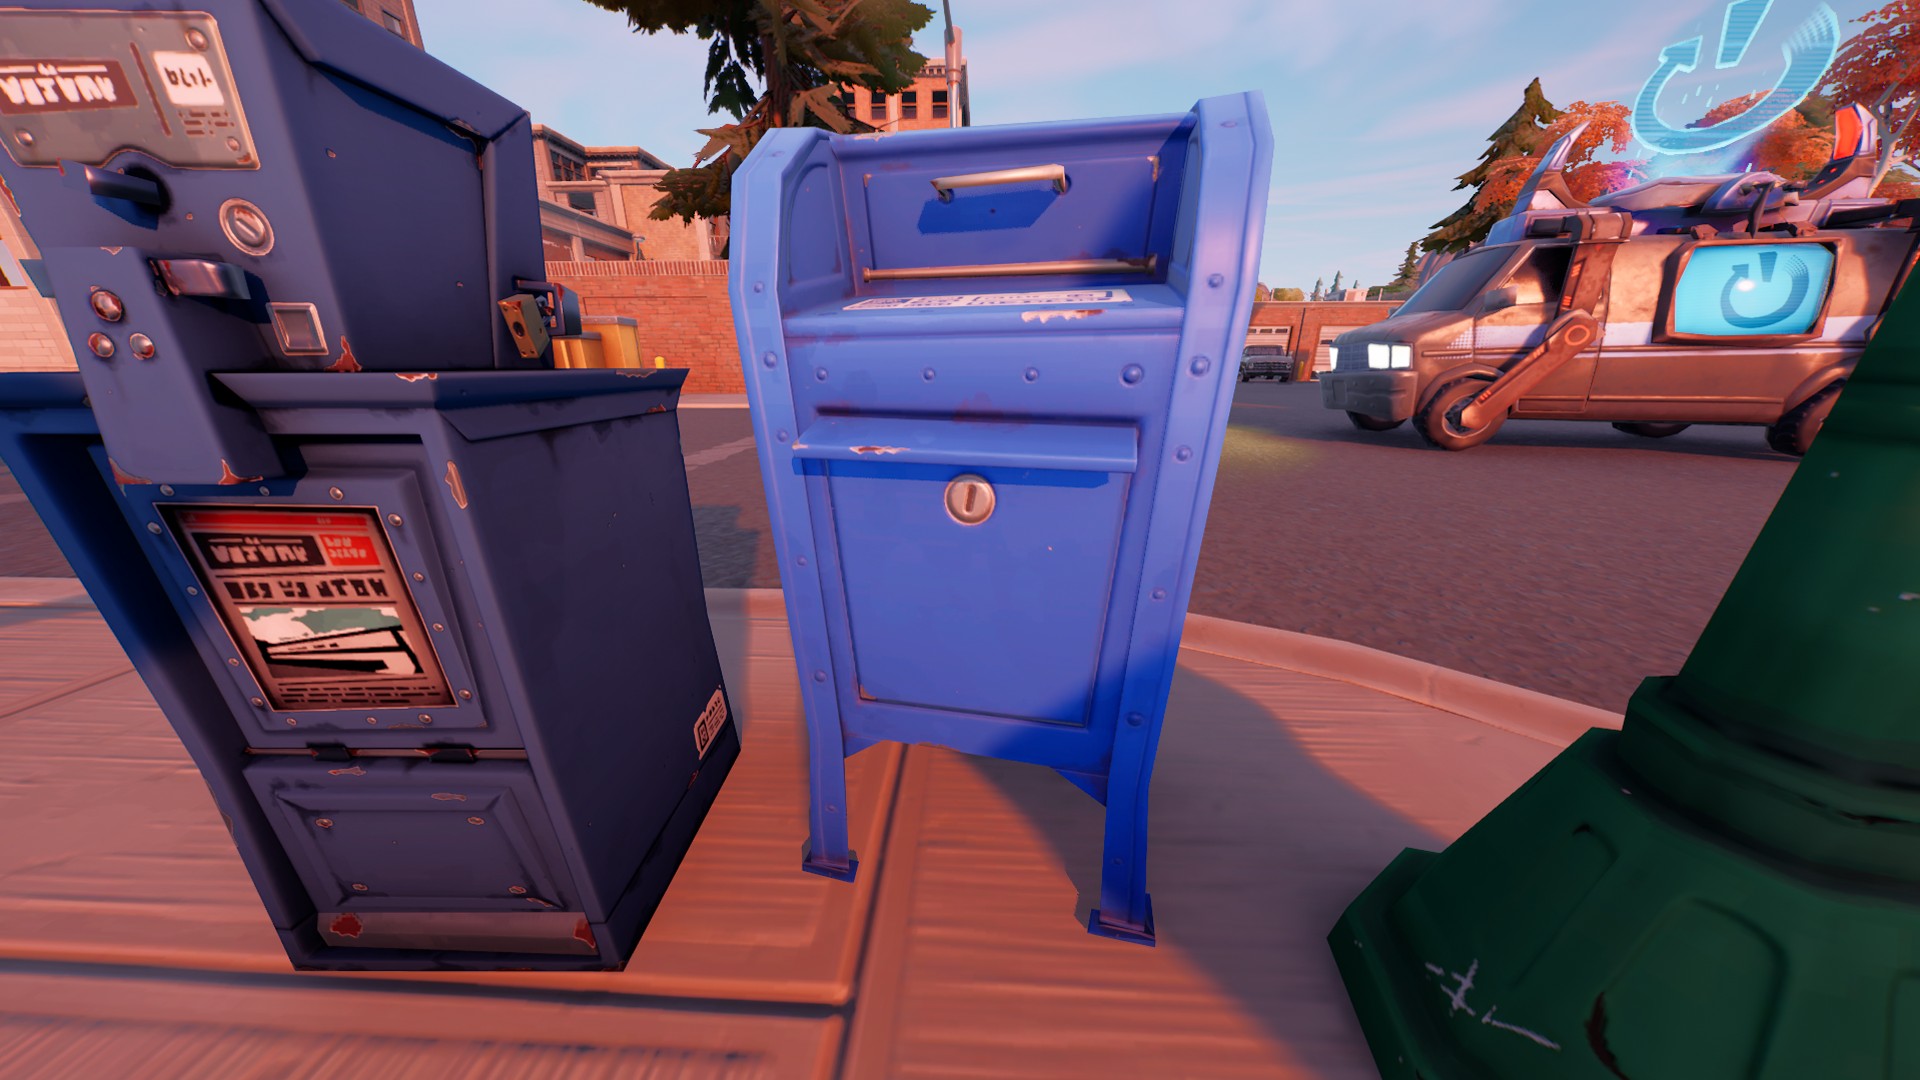  Where to destroy mailboxes in Tilted Towers in Fortnite 